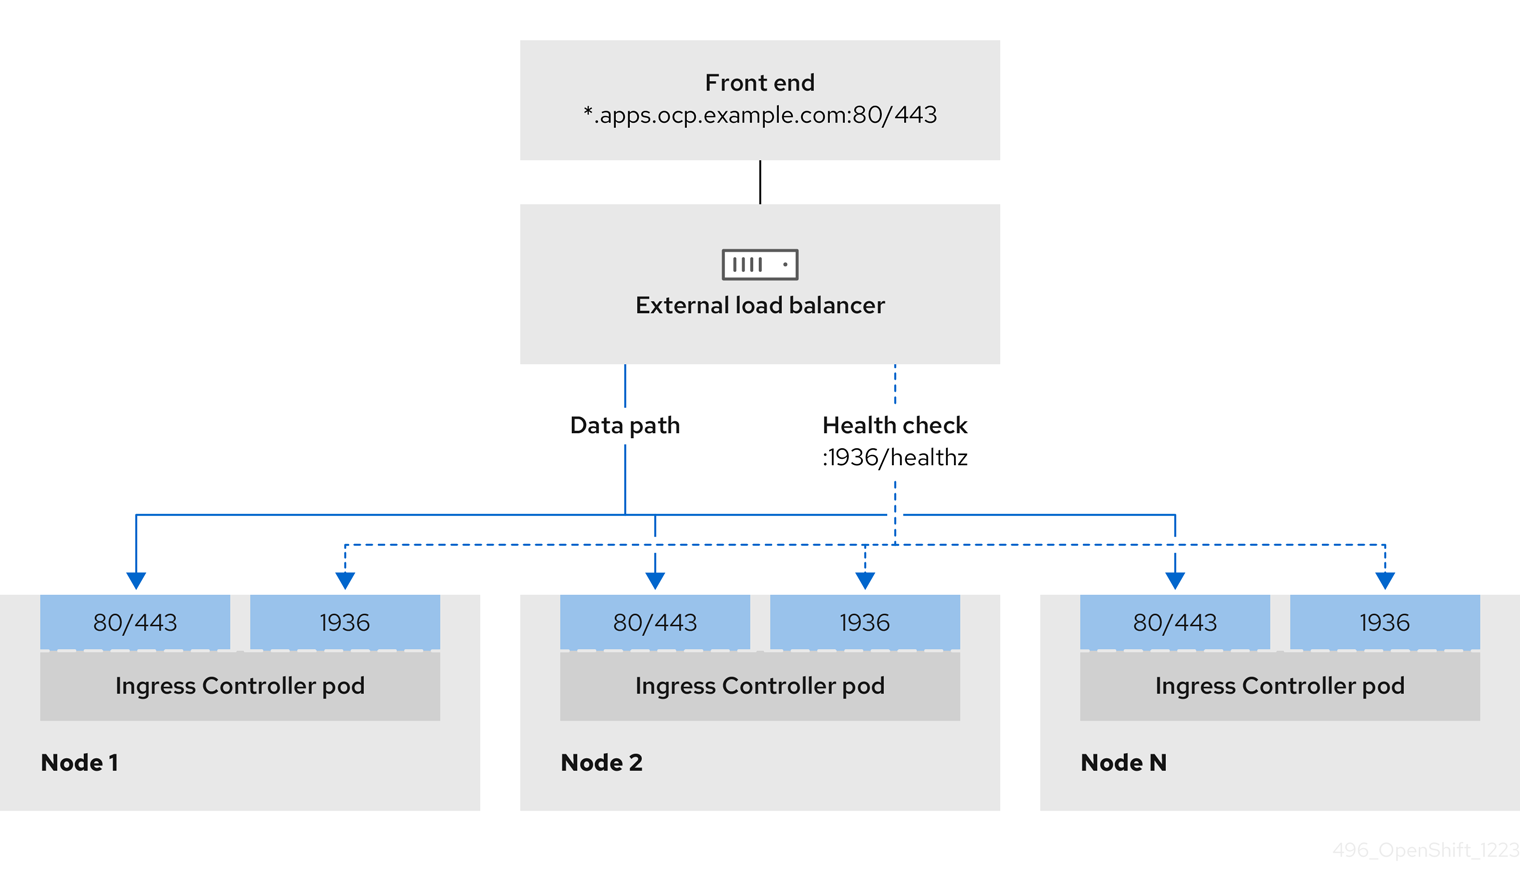 An image that shows an example network workflow of an Ingress Controller operating in an OpenShift Container Platform environment.